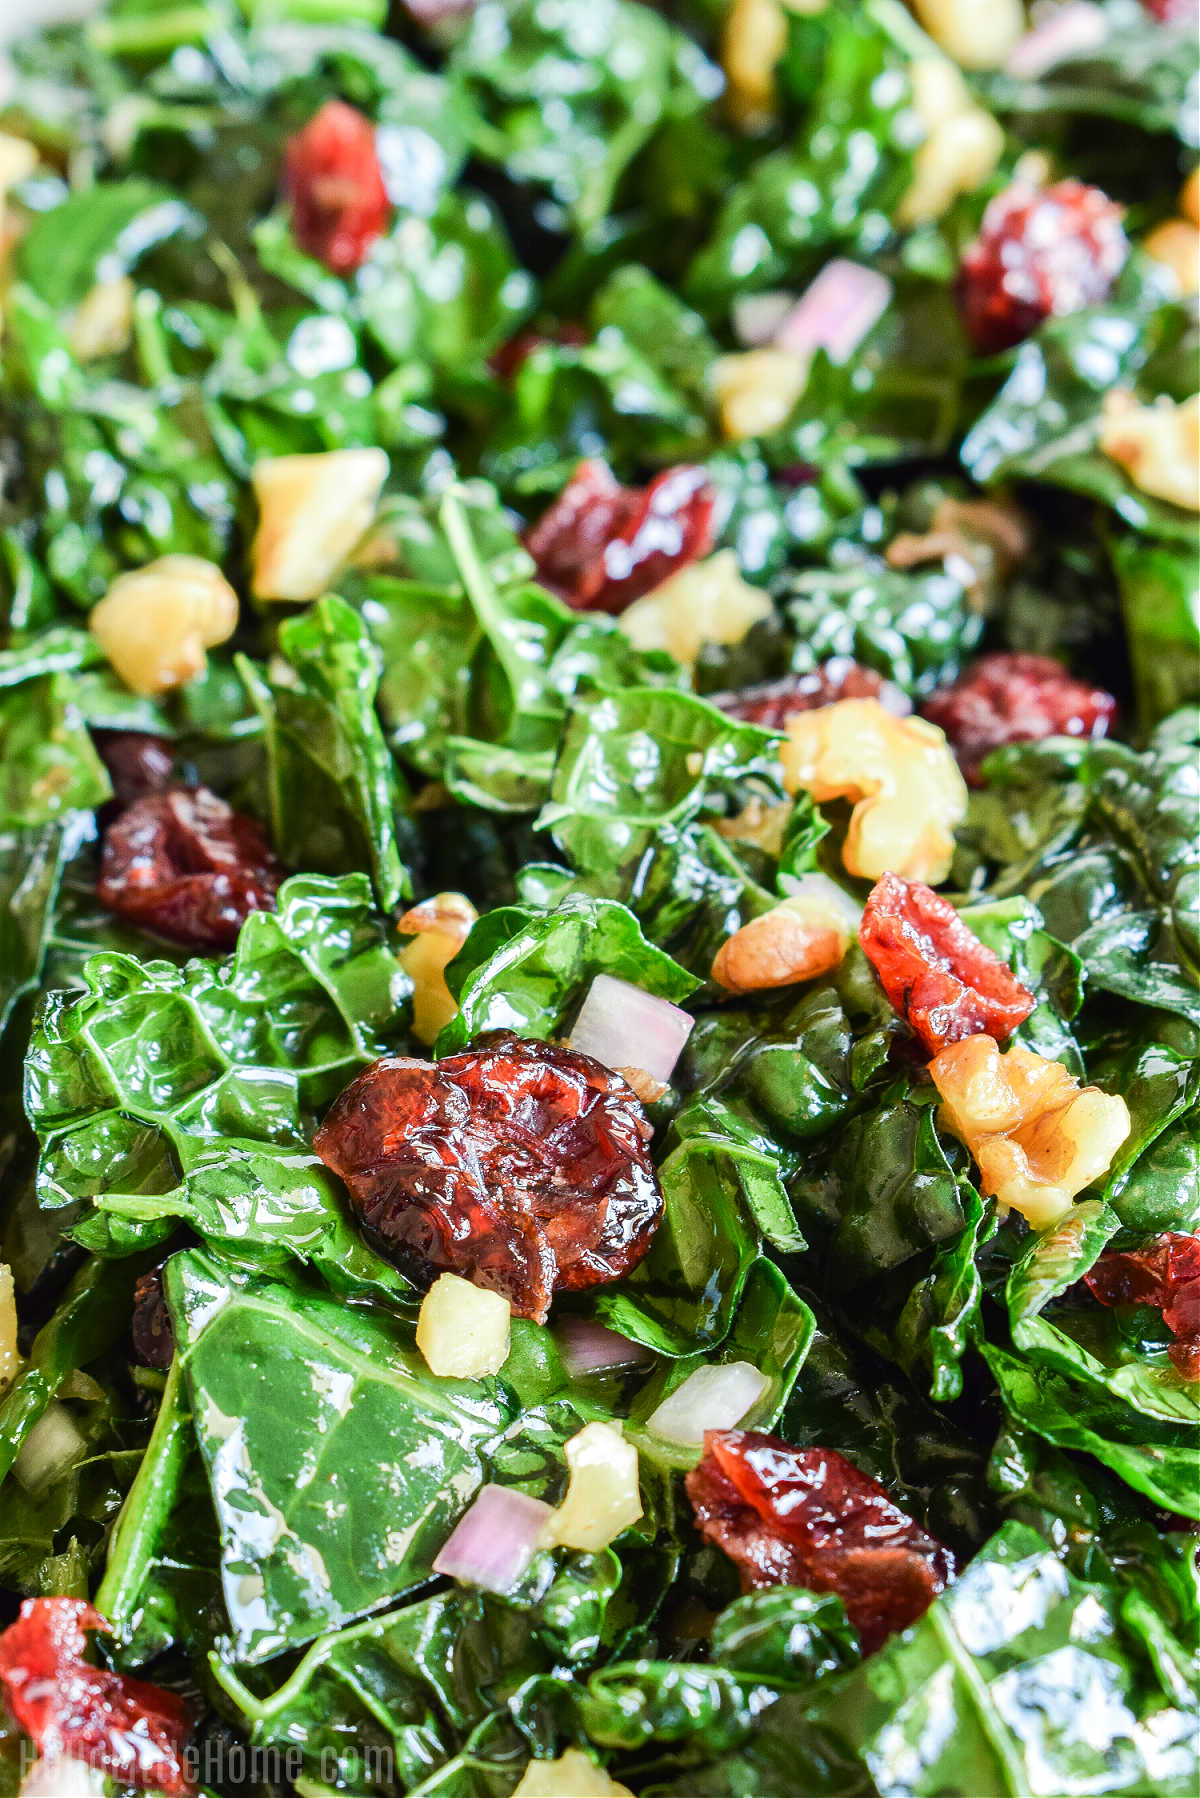 A close up of the finished salad topped with cranberries and walnuts.